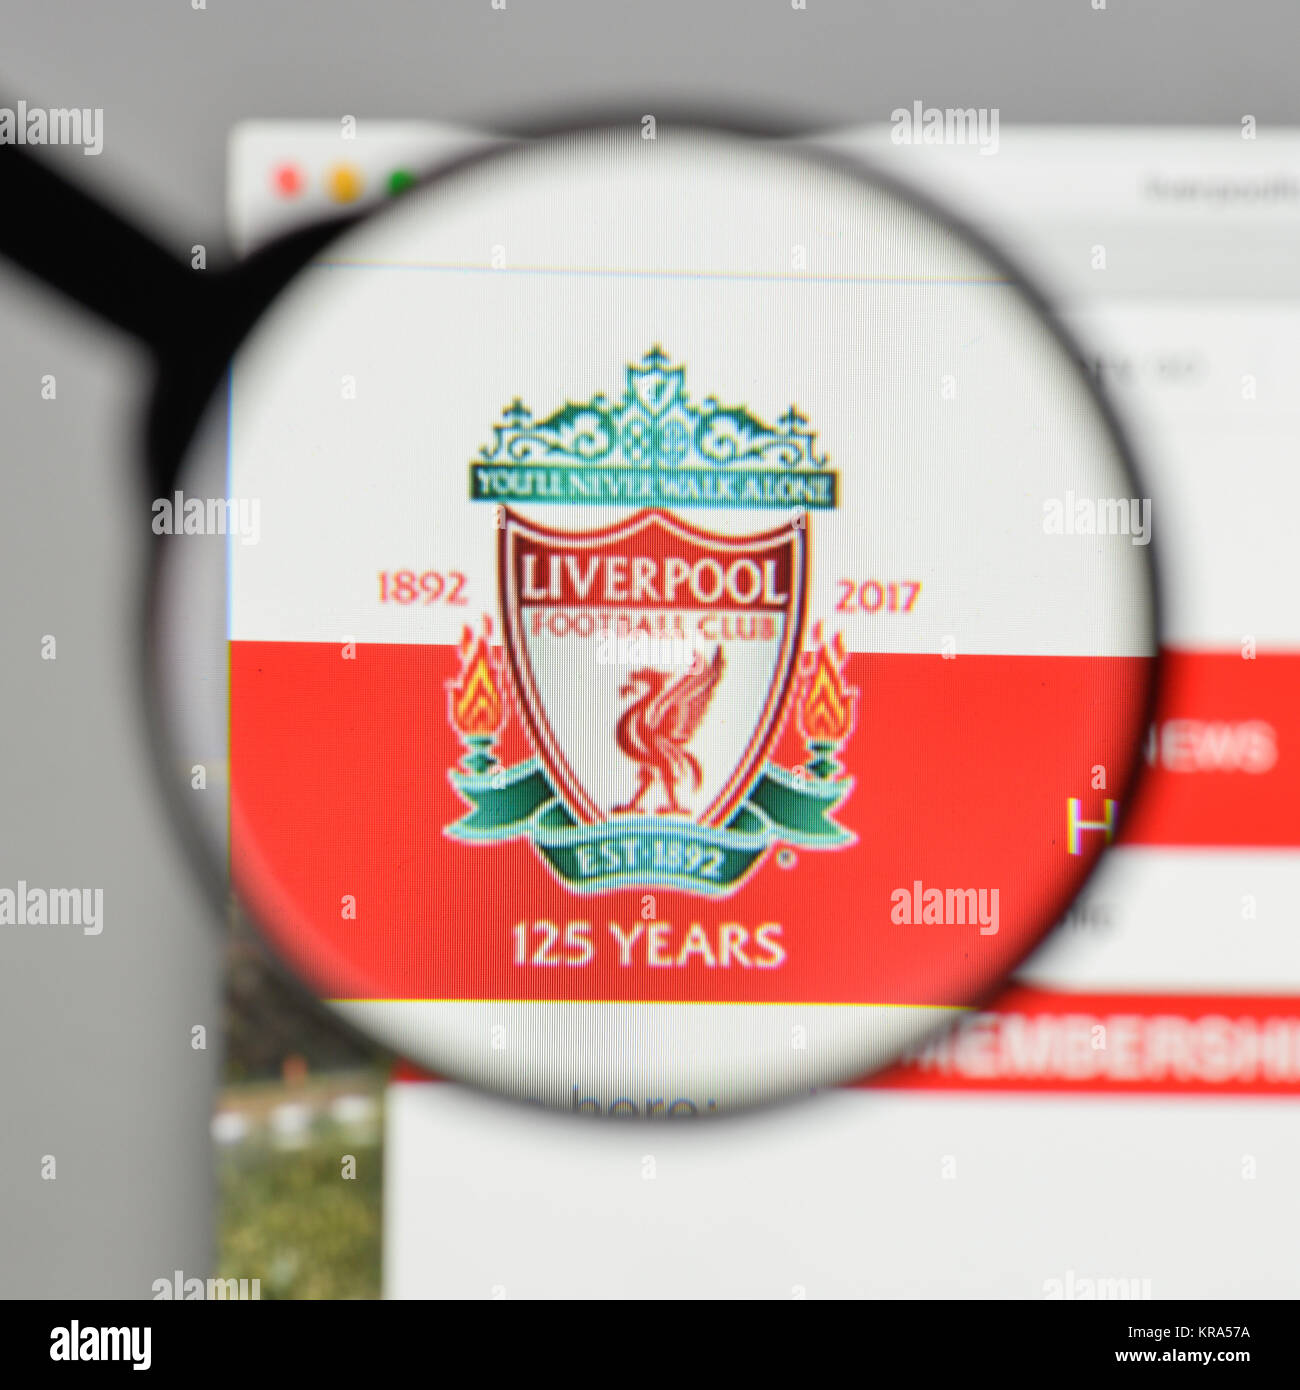 Milan, Italy - August 10, 2017: FC Liverpool logo on the website homepage. Stock Photo